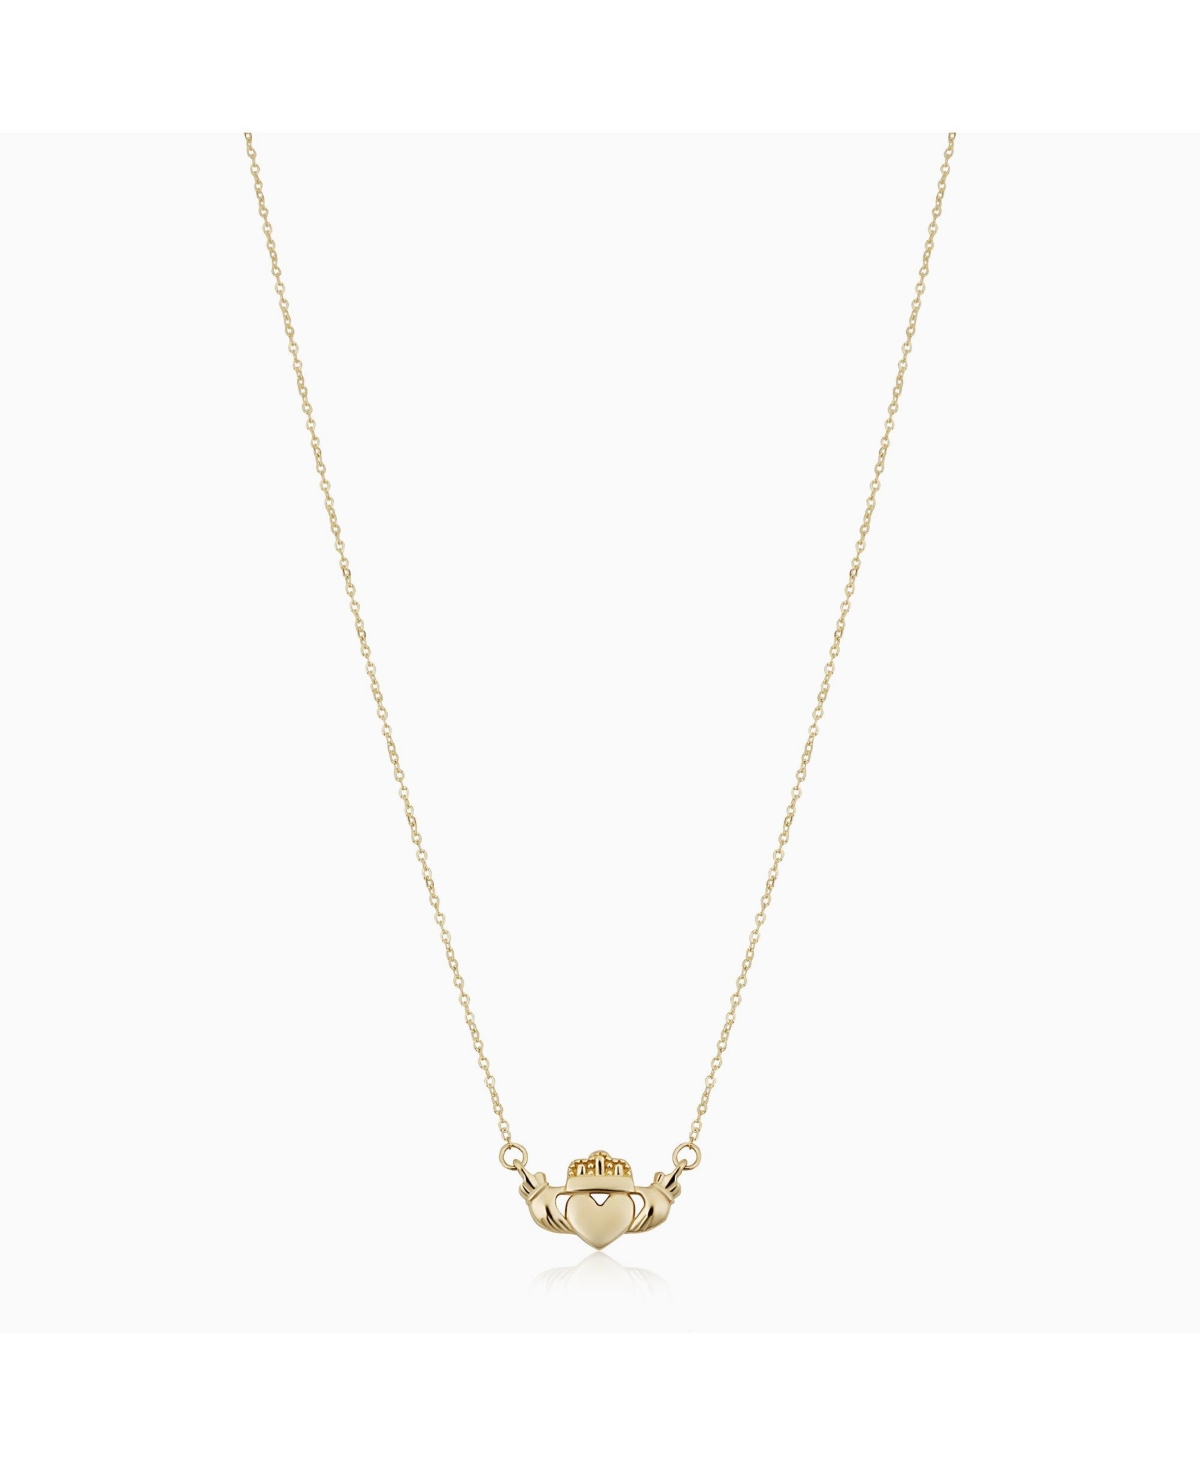 ORADINA CLADDAGH PENDANT NECKLACE 16-18" IN 14K YELLOW GOLD